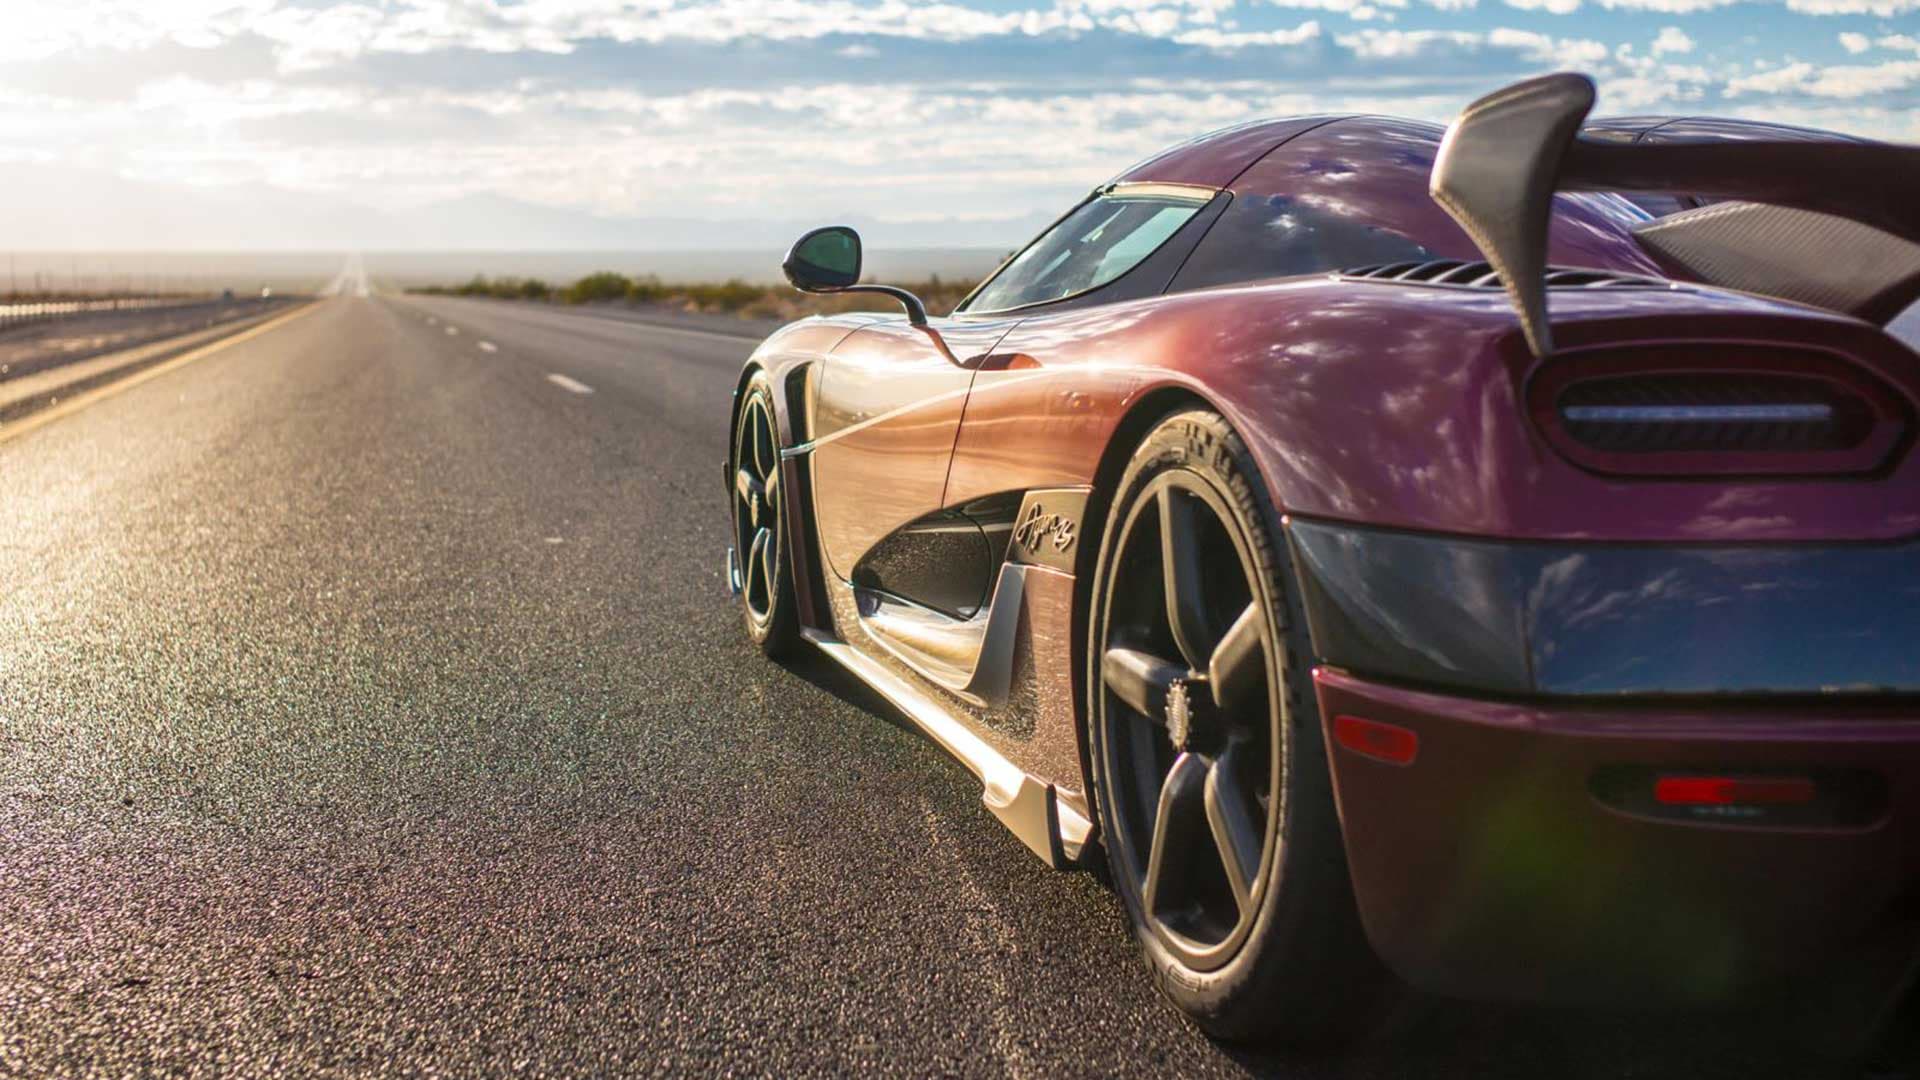 How Fast Can the Koenigsegg Agera RS’s Michelins Go? 300 MPH Isn’t Out of the Question